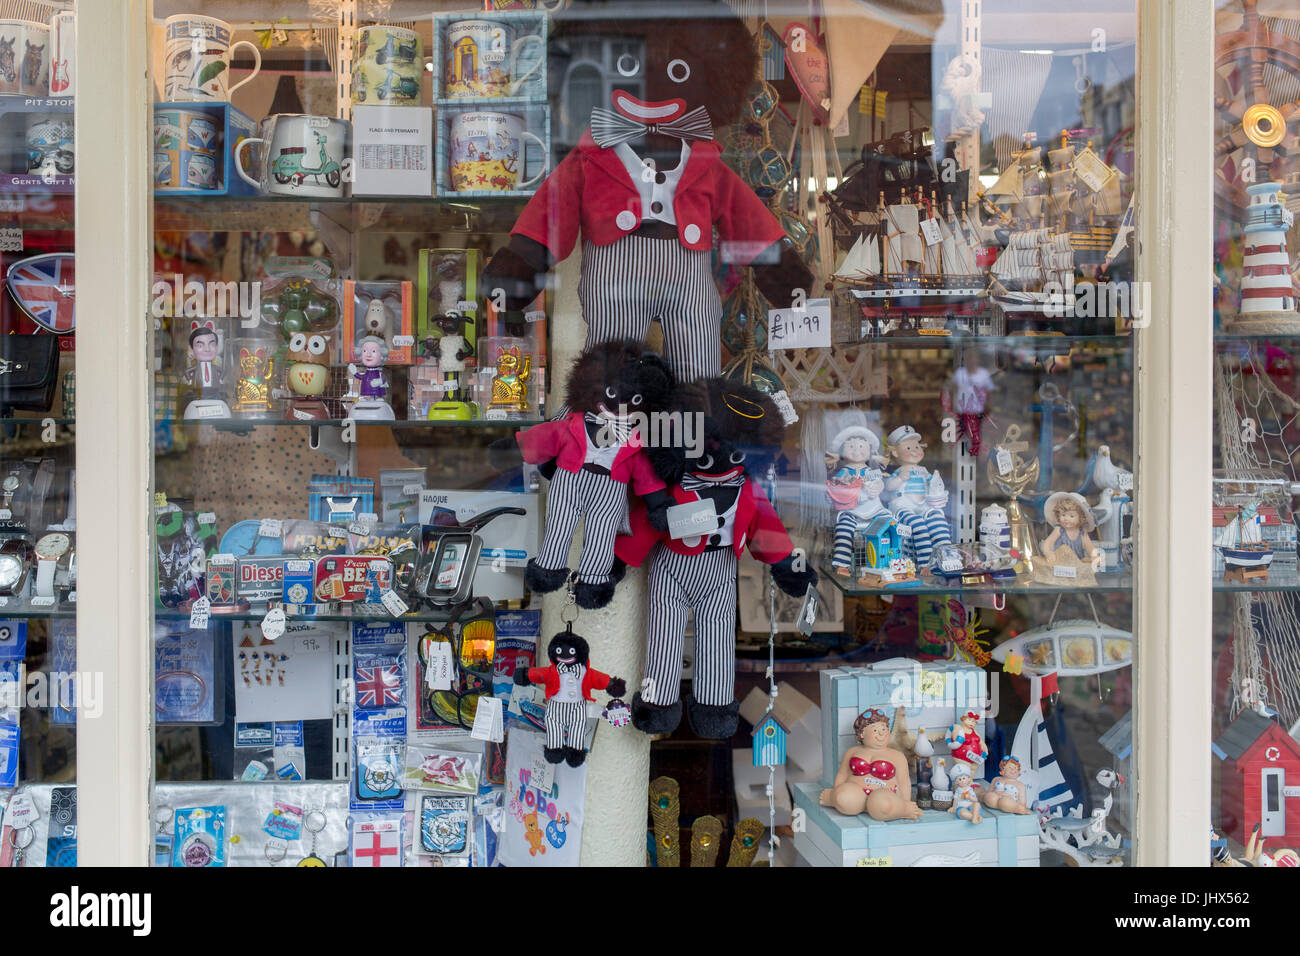 Detail of a shop window selling seaside holiday trinkets including different sizes of Golliwogs, on 14th July 2017, at Scarborough, North Yorkshire, England. The golliwog is a black fictional character from the late 19th century depicting a rag doll. It was reproduced by commercial and hobby toy-makers as a children's toy and had great popularity in the UK and Australia into the 1970s. The doll has black skin, eyes rimmed in white, clown lips and frizzy hair and was seen, along with the teddy bear, as a suitable soft toy for a young boy. The image of the doll has become the subject of controve Stock Photo